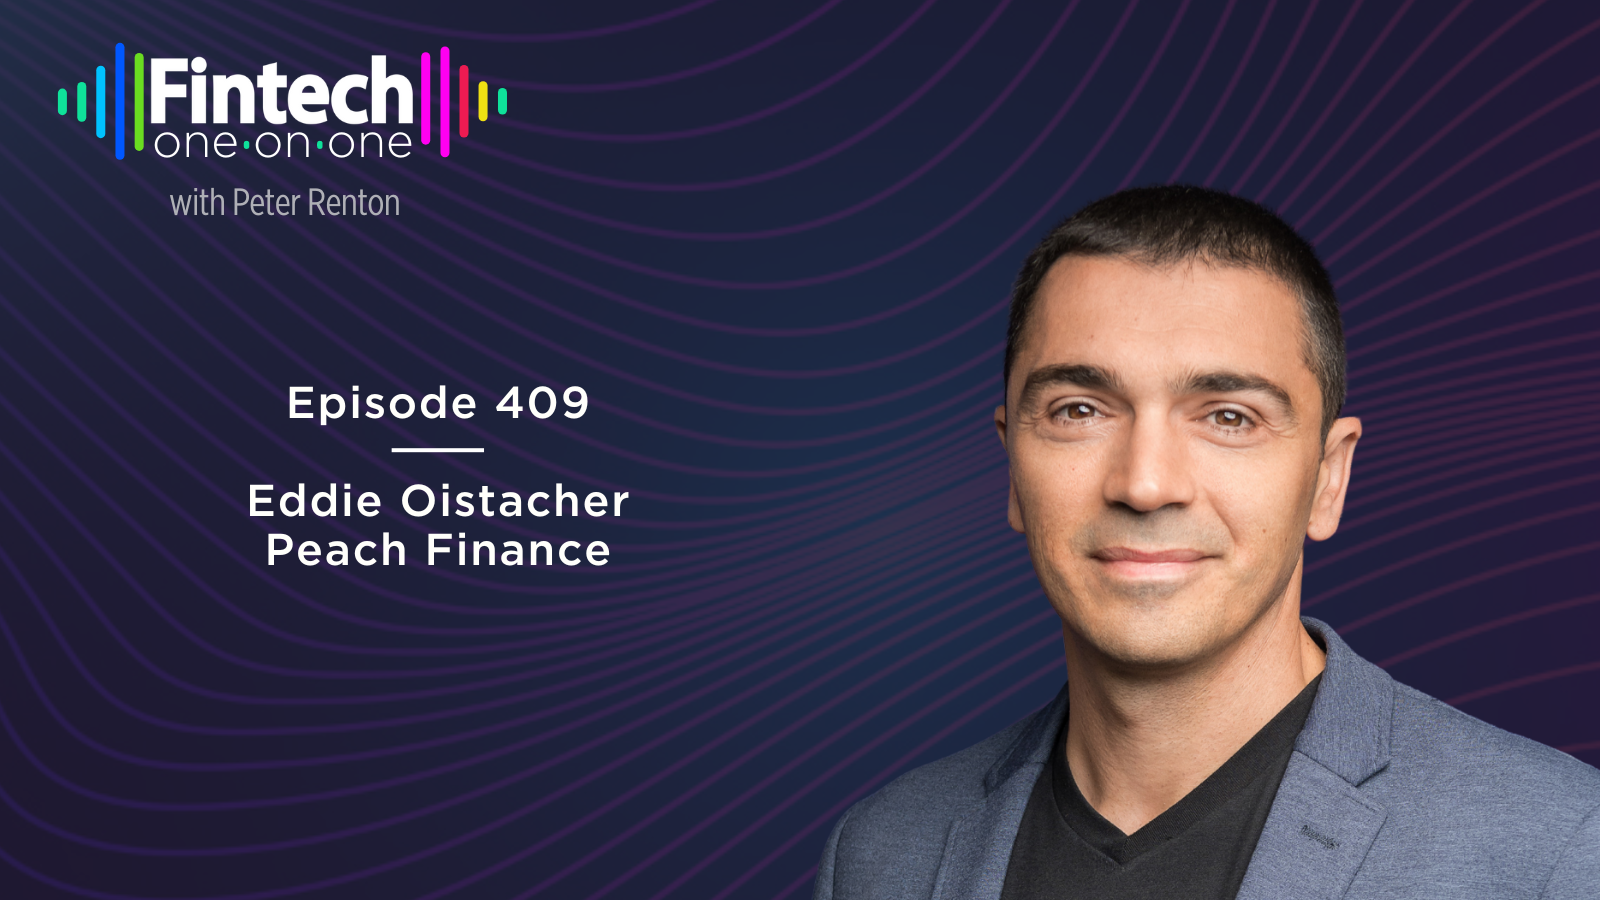 Episode 409 of the Fintech One-on-One podcast with Peach CEO Eddie Oistacher